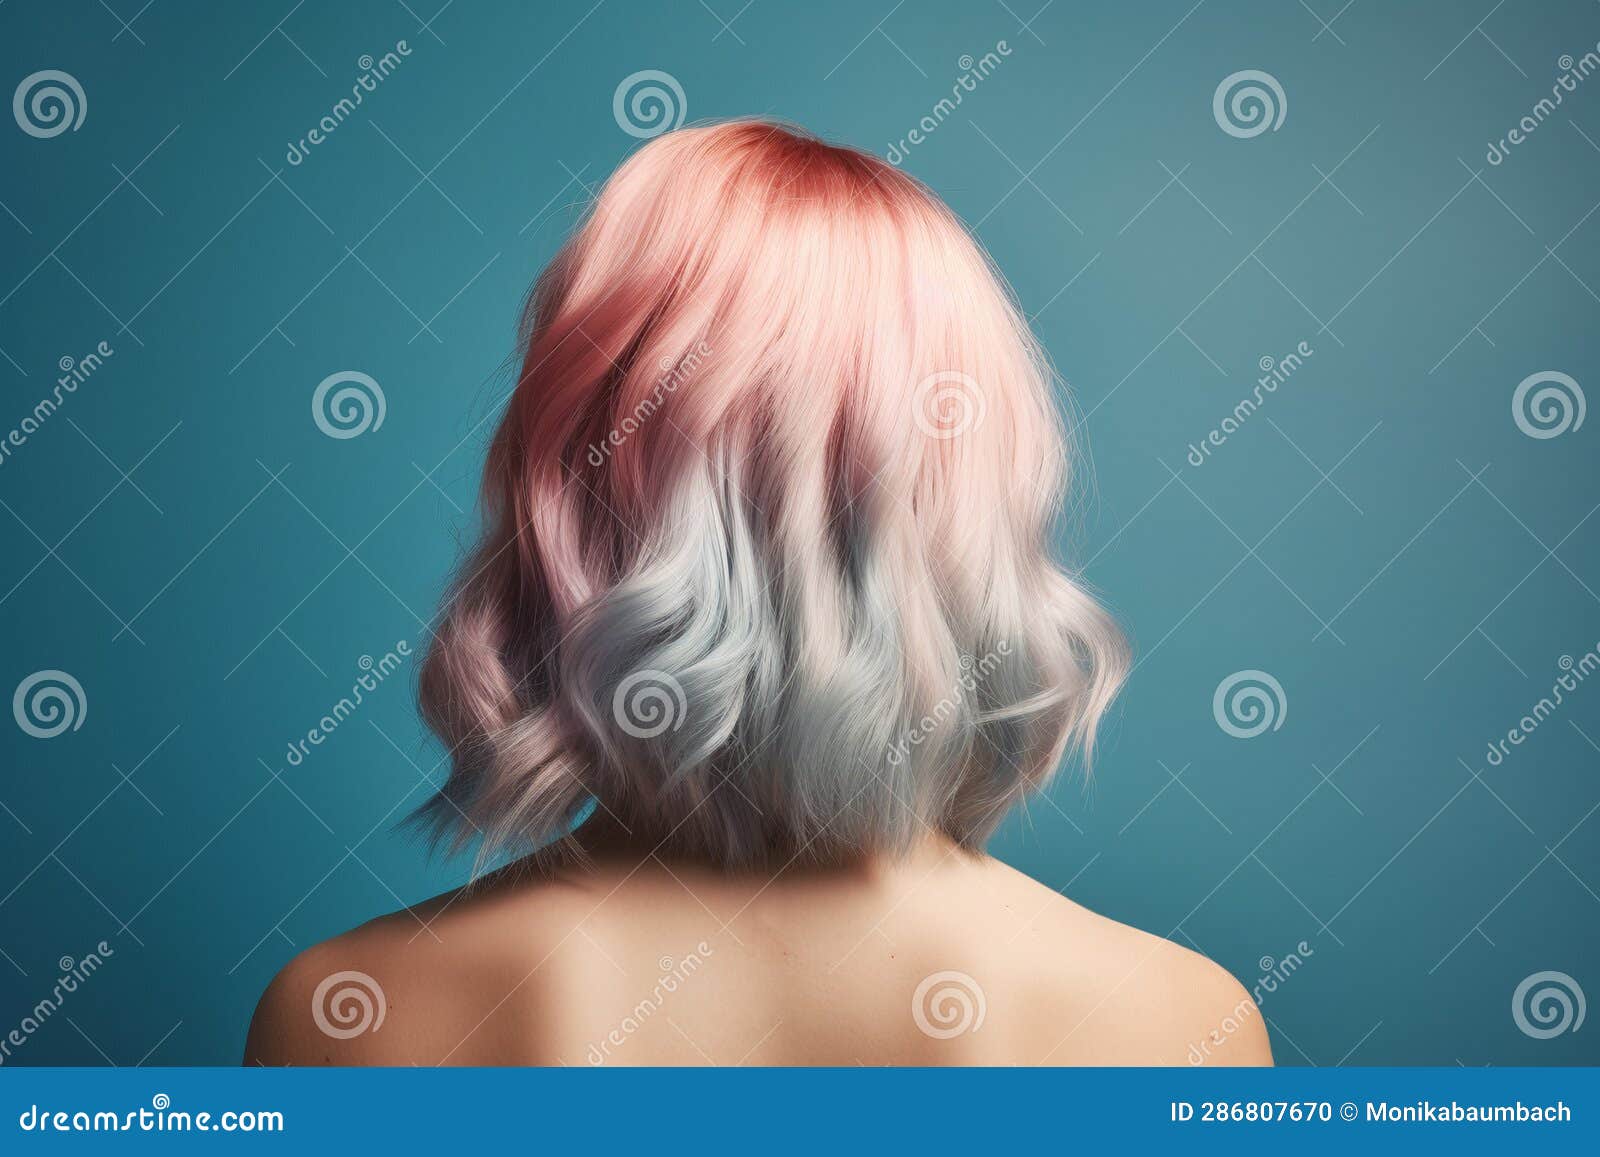 Pastel Blue and Pink Hair Dye - wide 8